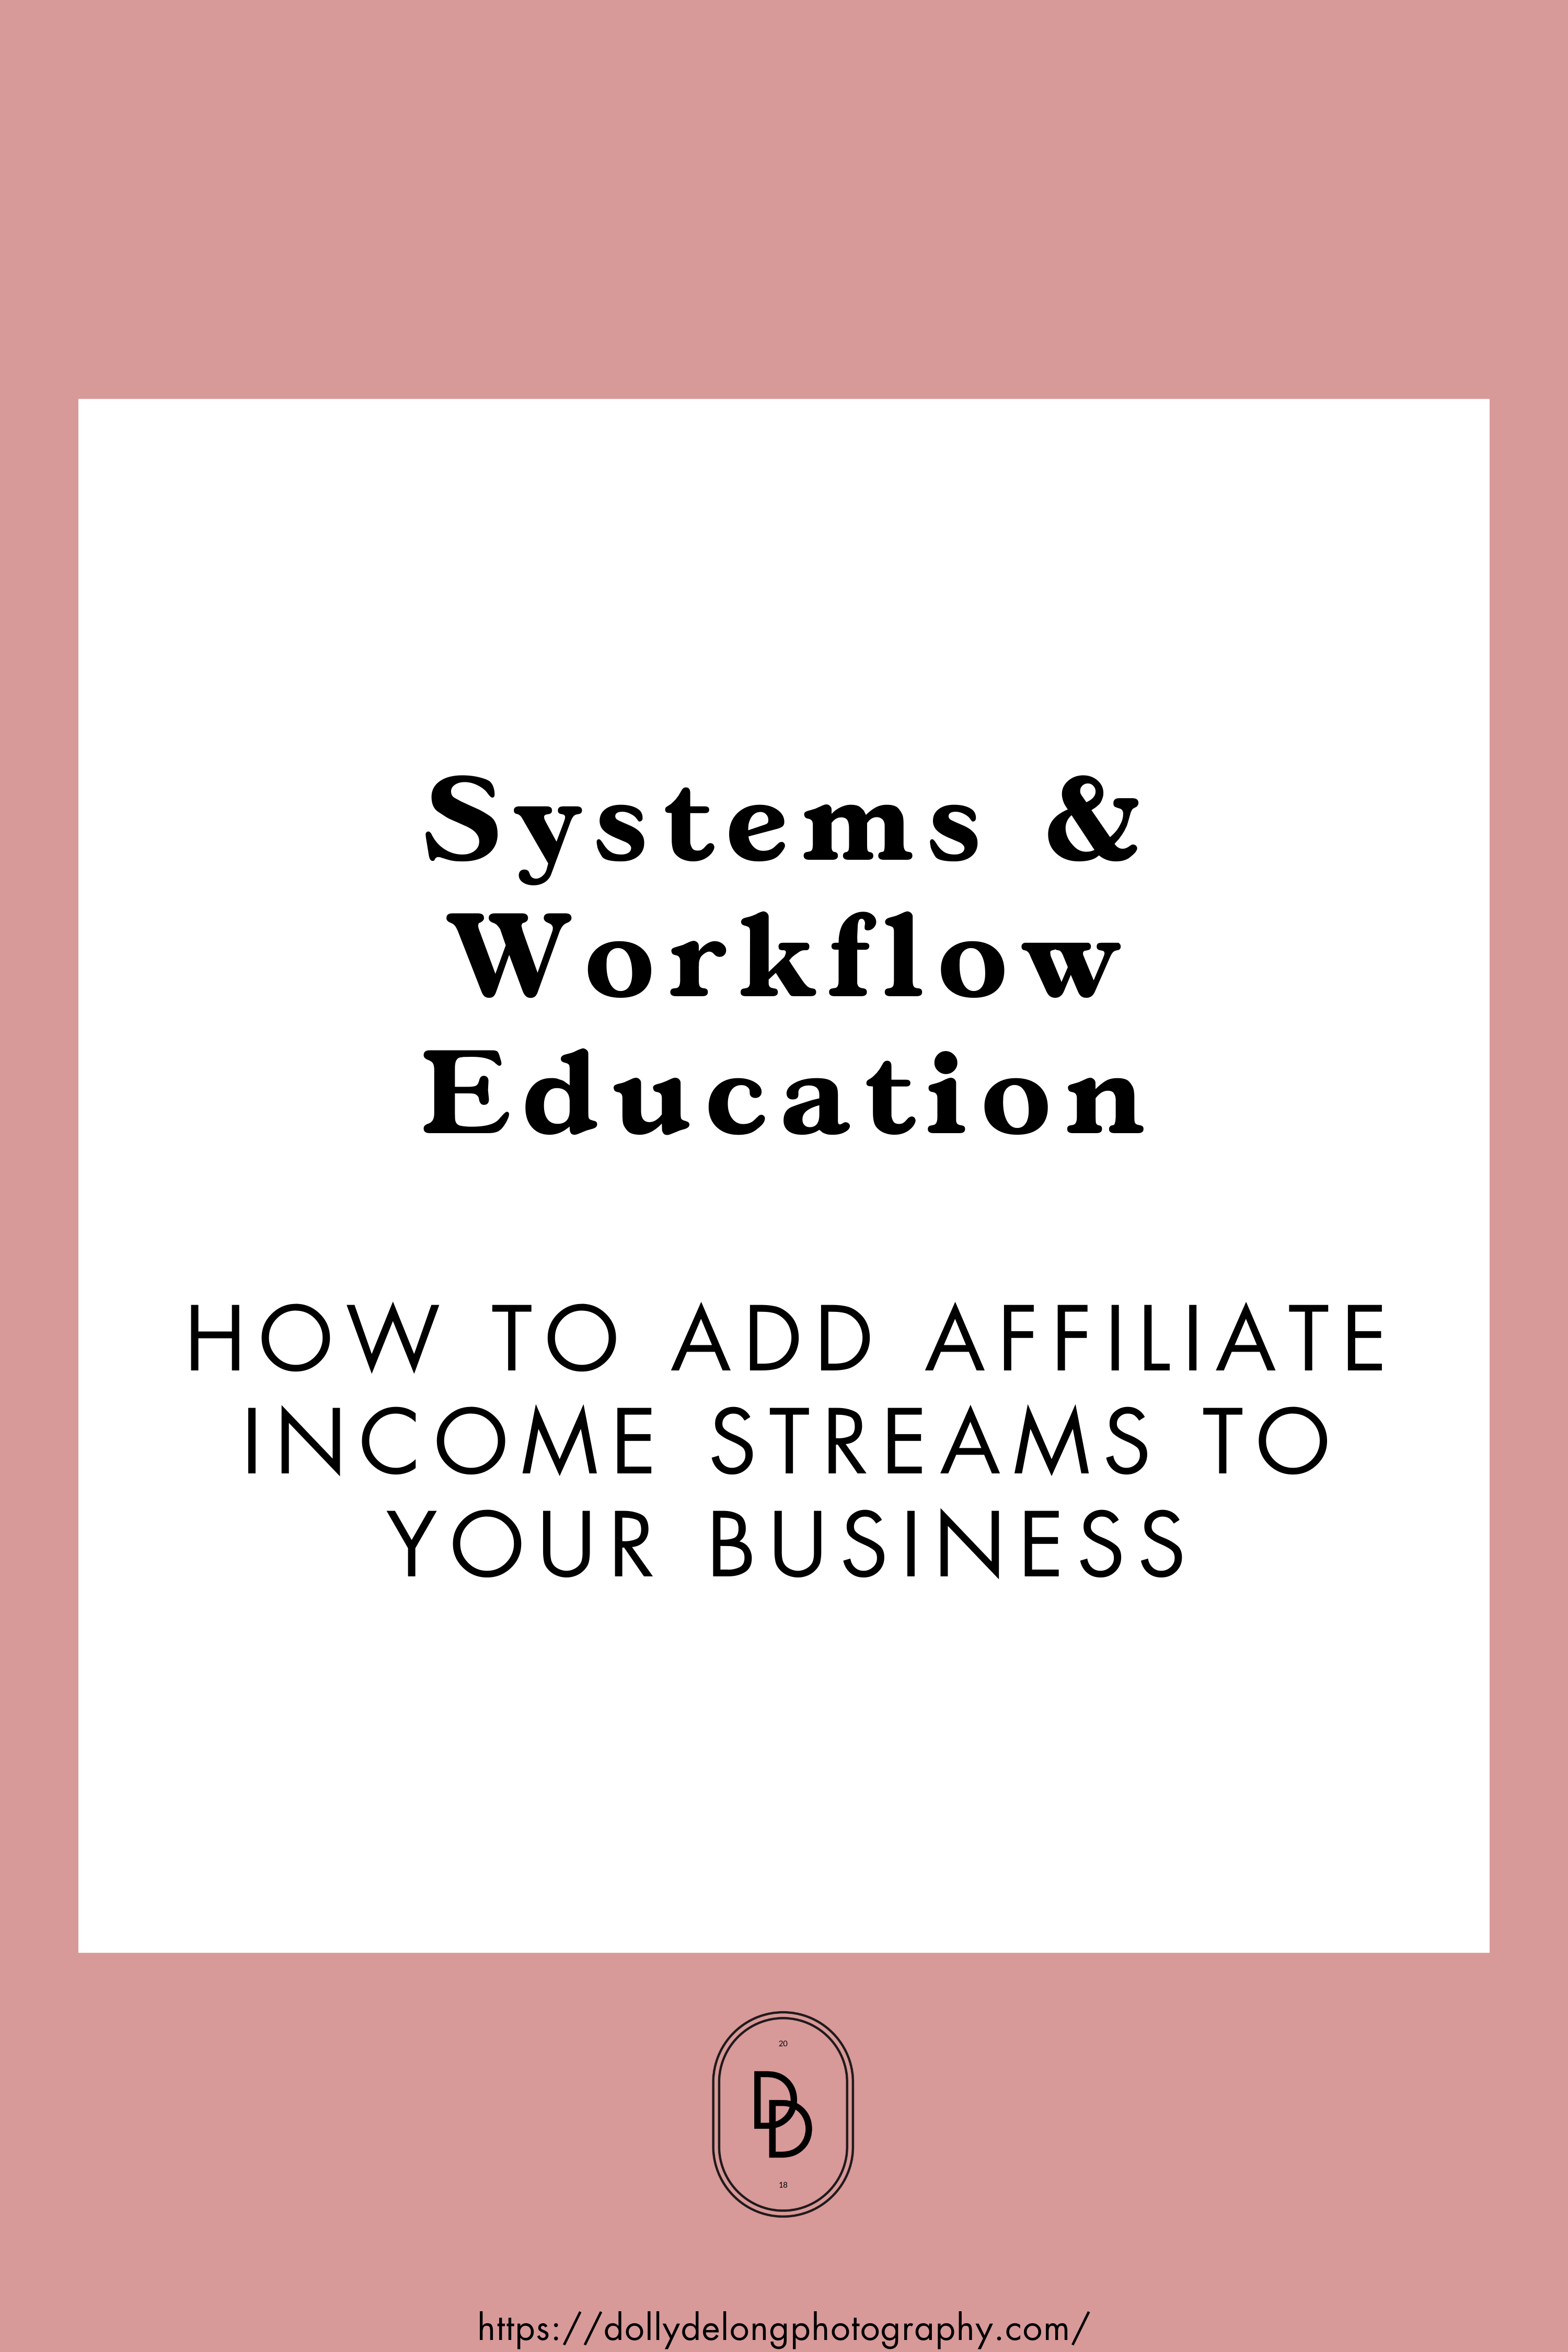 How to Add Affiliate Income Streams to Your Business4